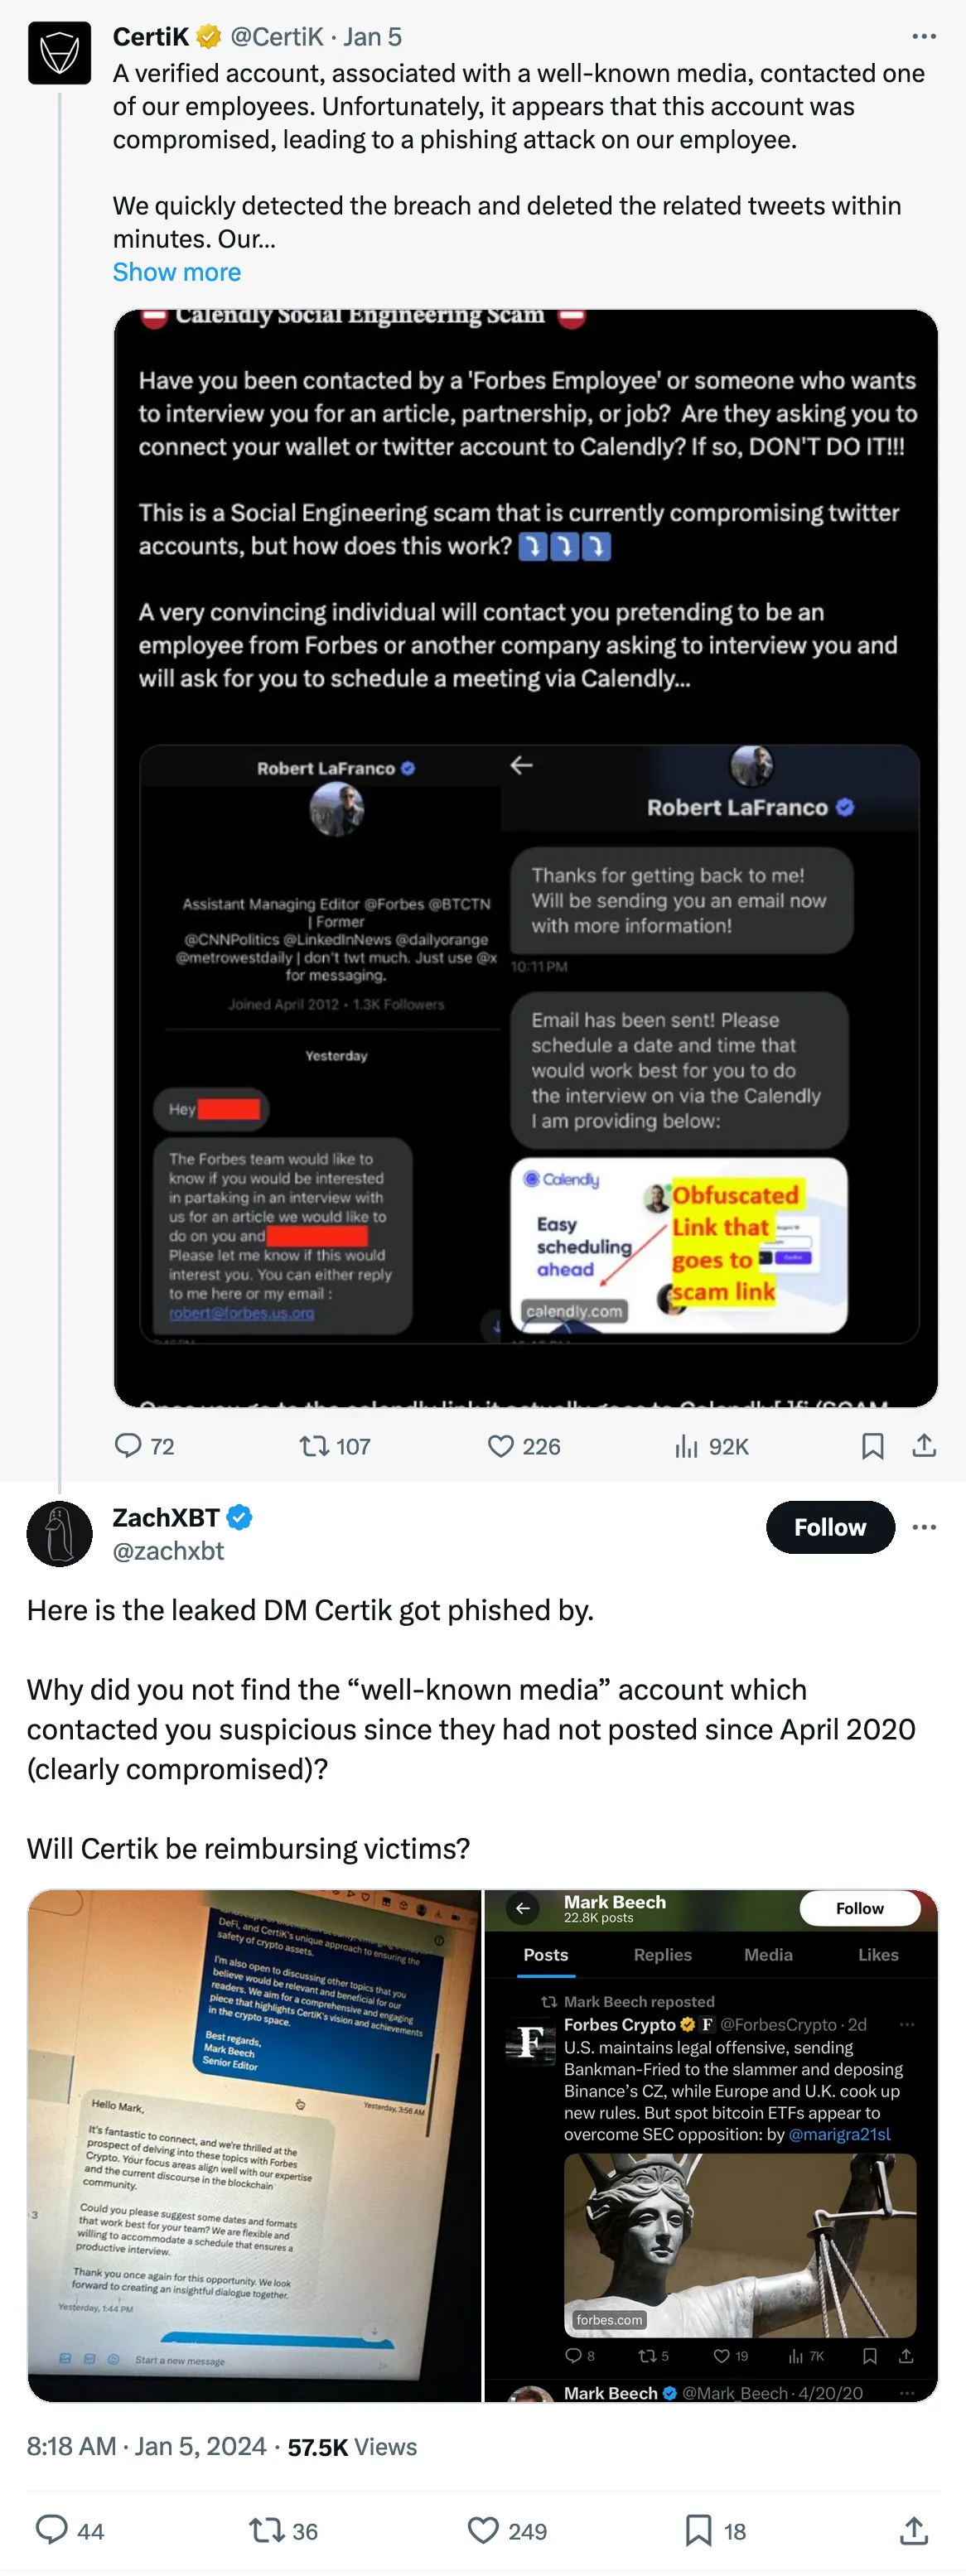 A verified account, associated with a well-known media, contacted one of our employees. Unfortunately, it appears that this account was compromised, leading to a phishing attack on our employee.  

We quickly detected the breach and deleted the related tweets within minutes. Our… 
Tweeted at Jan 5

Here is the leaked DM Certik got phished by. 

Why did you not find the “well-known media” account which contacted you suspicious since they had not posted since April 2020 (clearly compromised)?

Will Certik be reimbursing victims? 
Tweeted at 8:18 AM · Jan 5, 2024